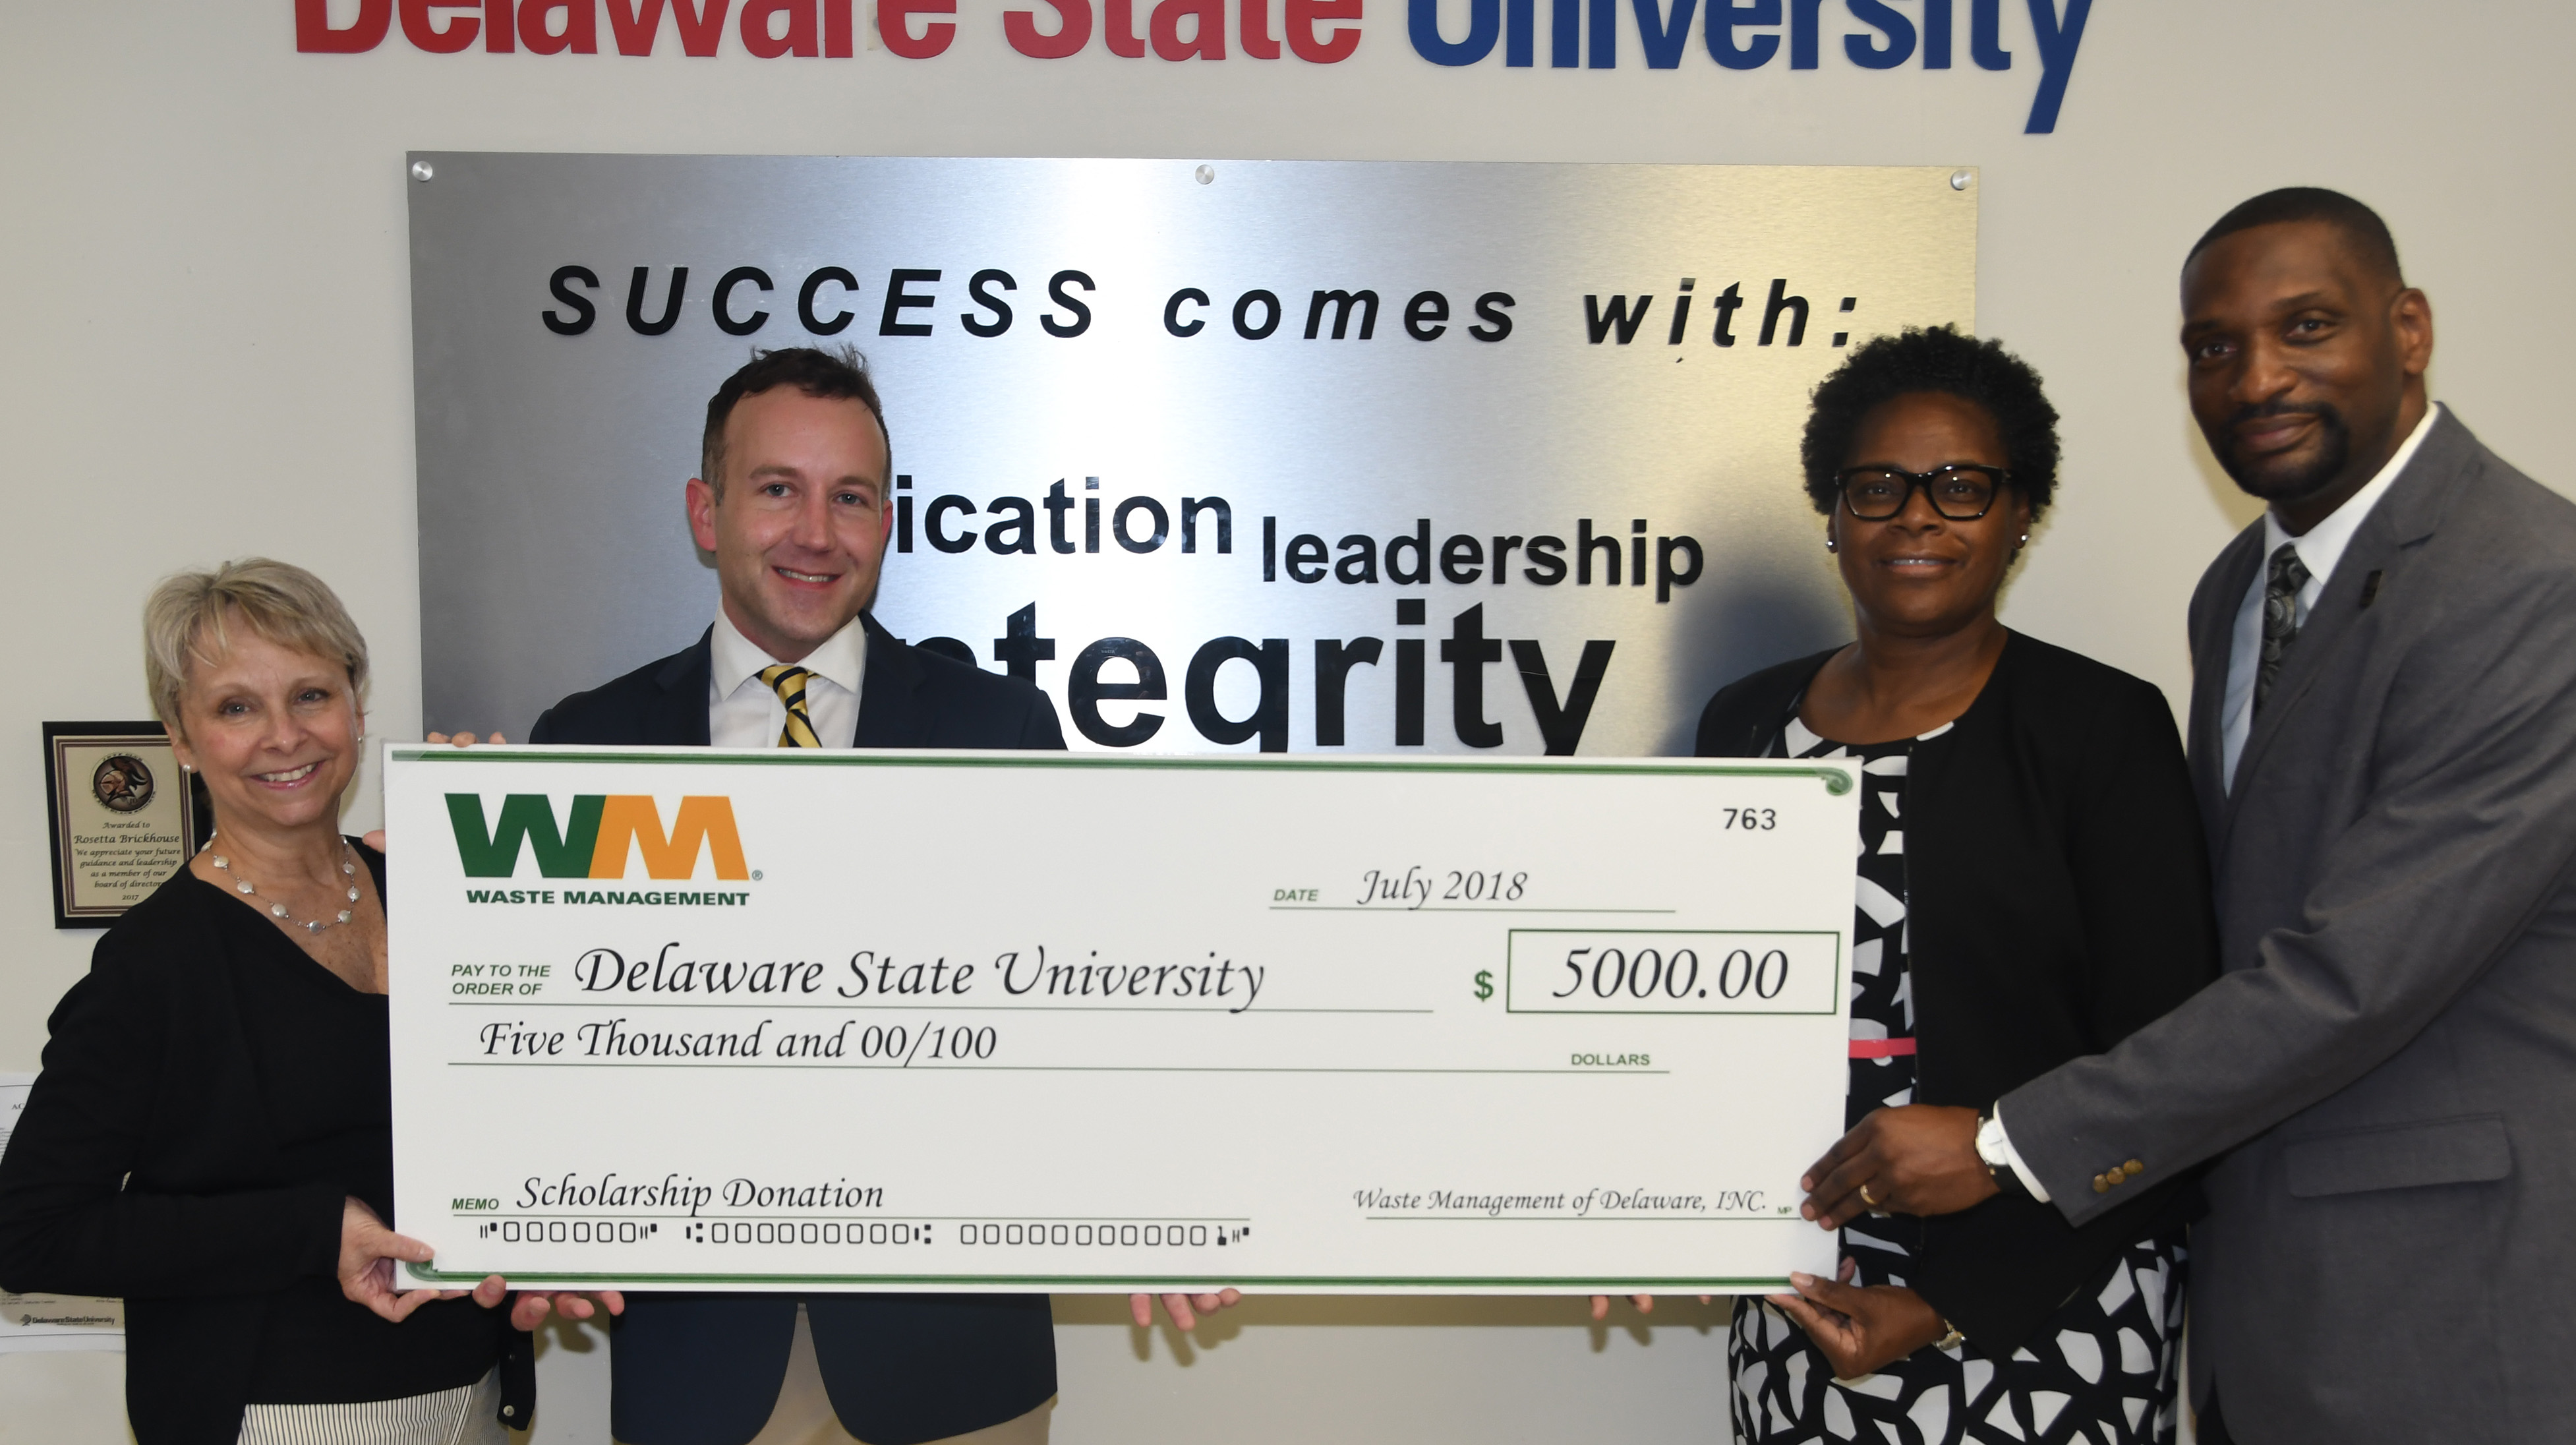 Waste Management donates $5,000 toward DSU scholarships: (l-r) Judy Diogo, president of the Central Del. Chamber of Commerce, Paul Beane of Waste Management, Rosetta Brickhouse, executive director of DSU Facility Operations, and Howard Gibson, associate director of Custodial & Grounds Services.